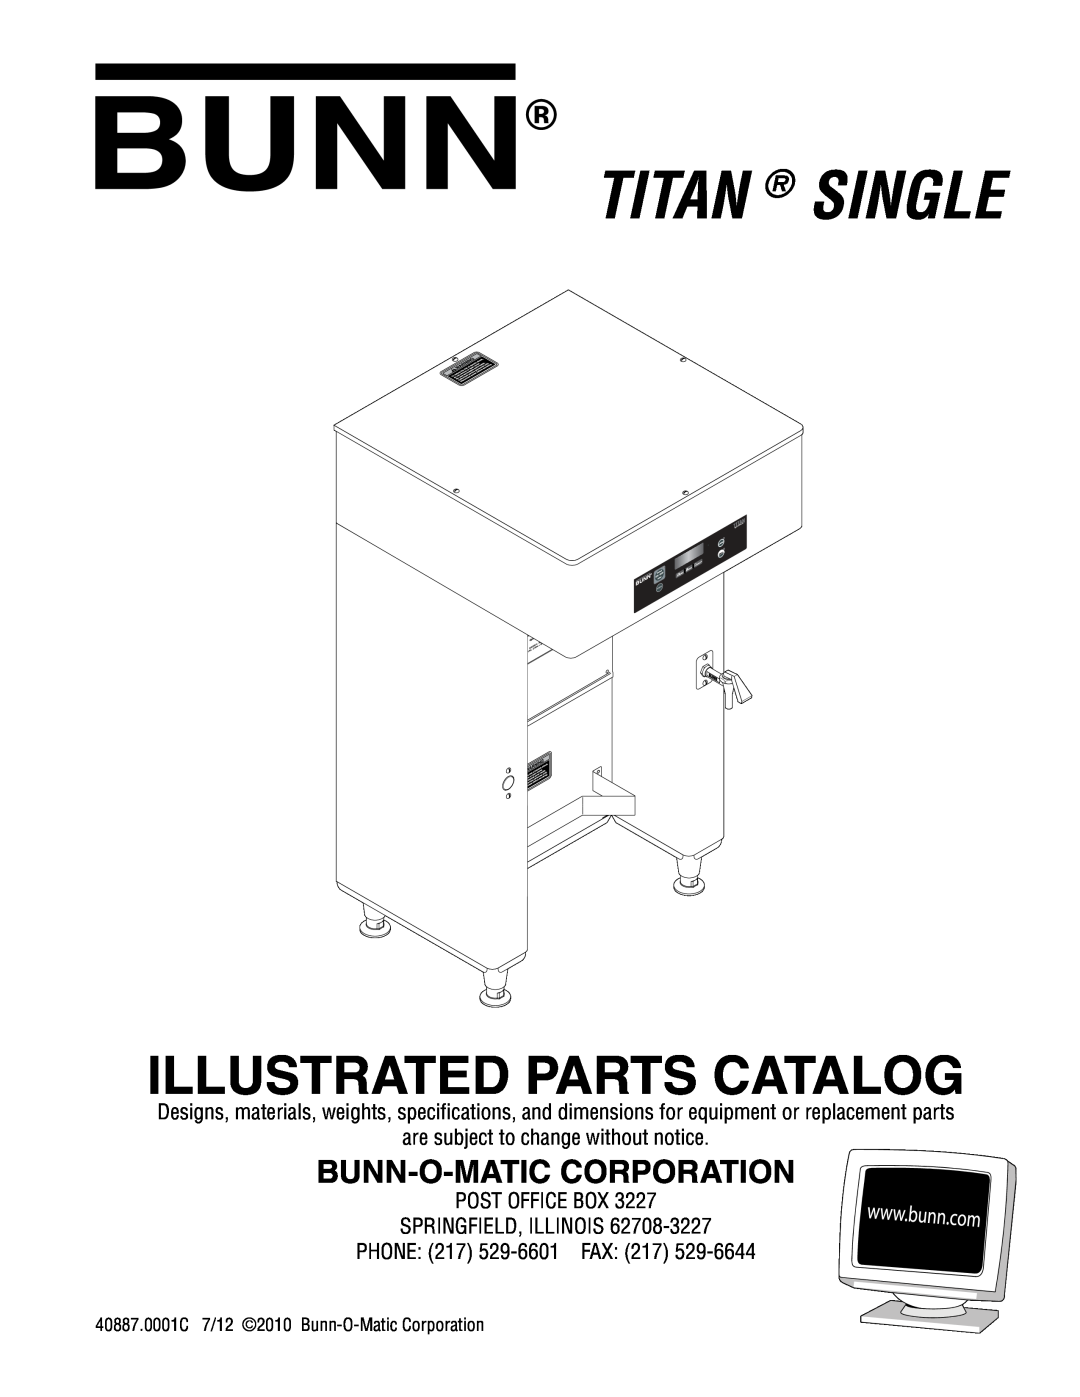 Bunn 2 operation manual Disassembly & Cleaning 